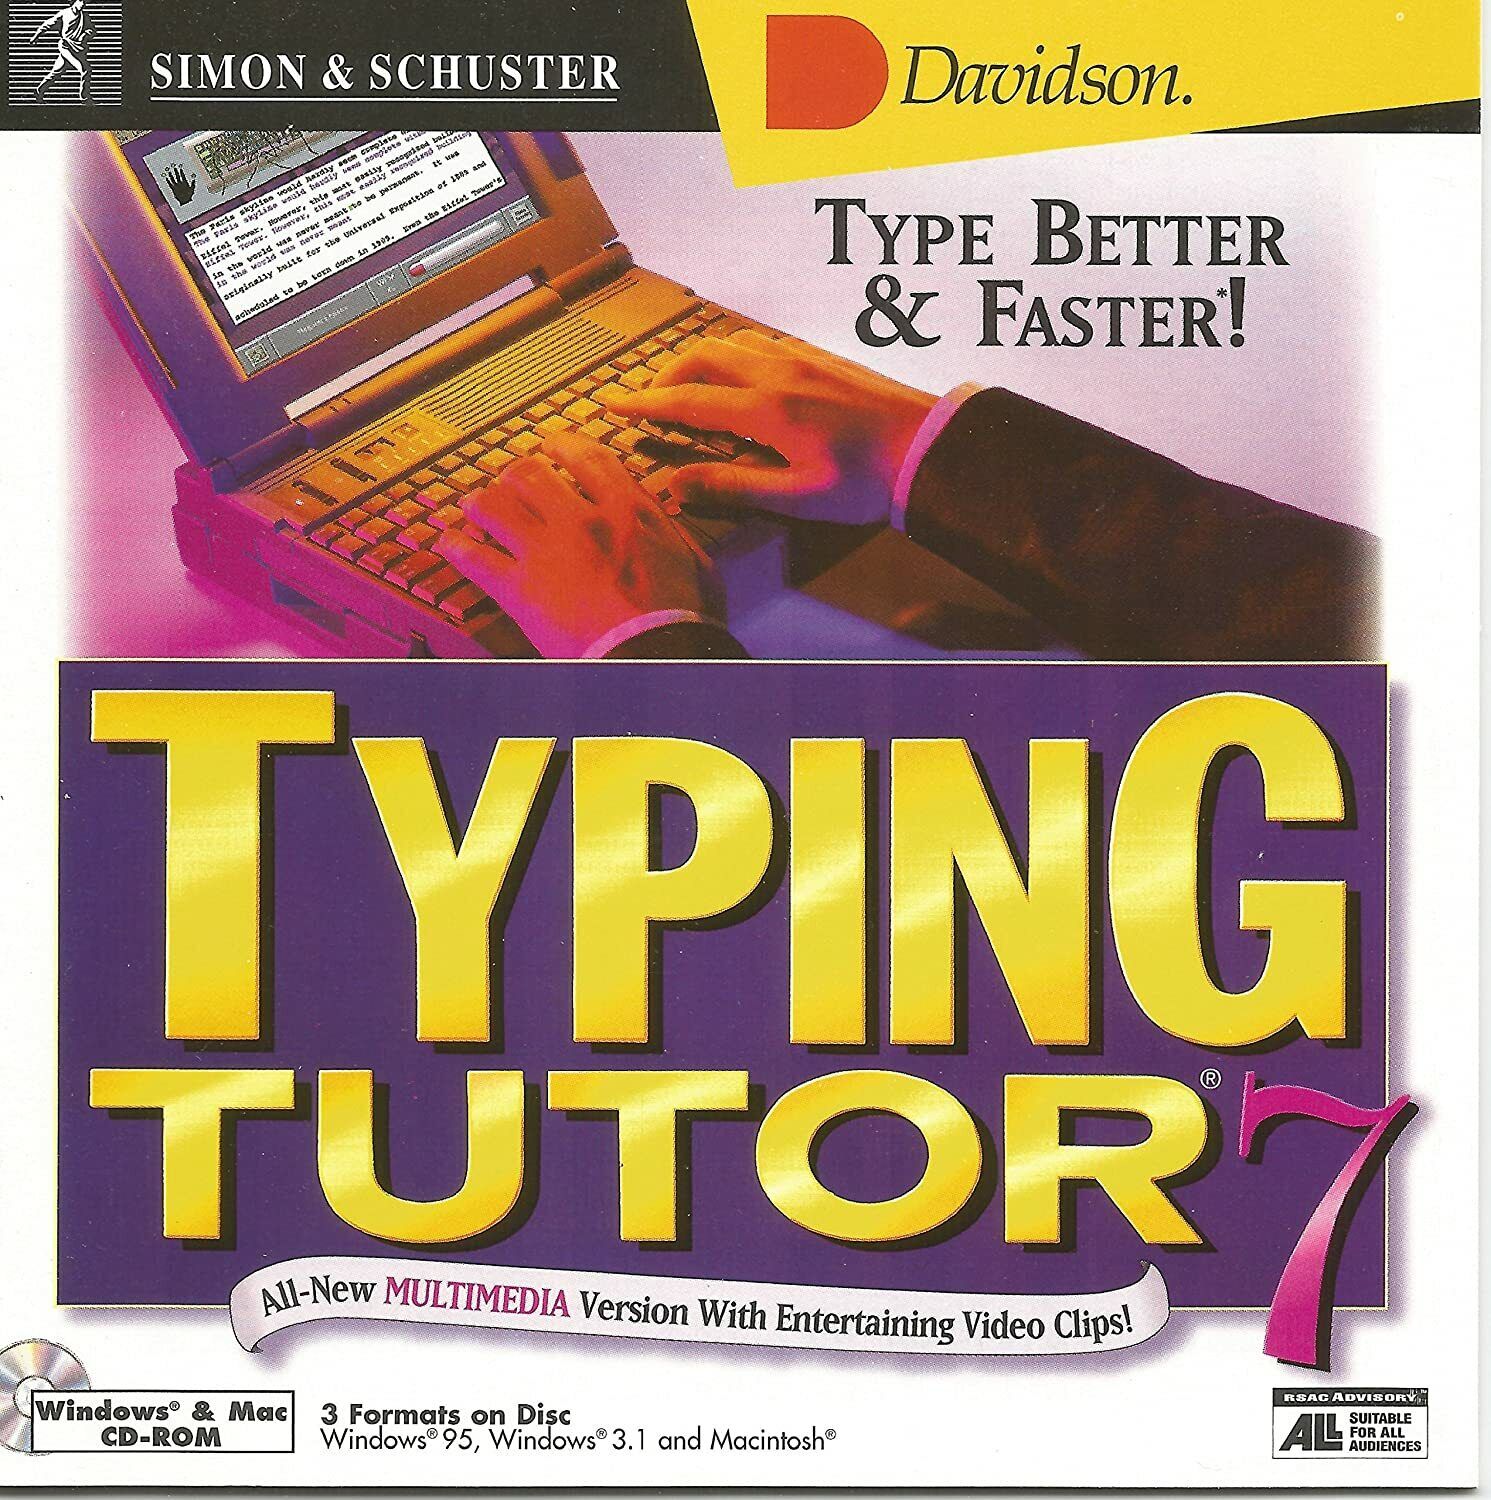 TYPING TUTOR 7 by Simon & Schuster CD-ROM